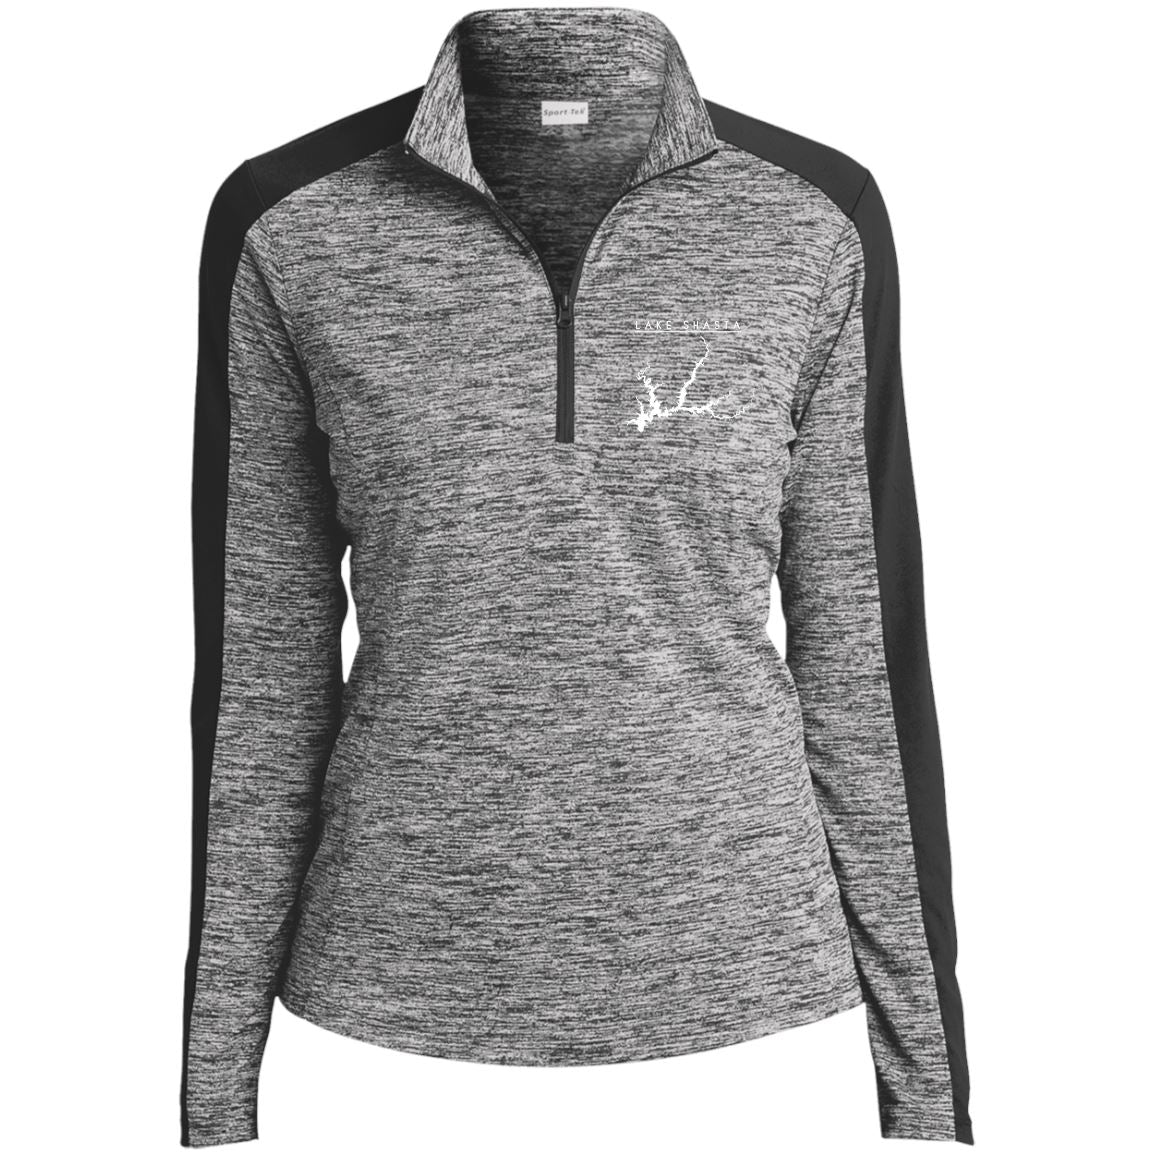 Lake Shasta Embroidered Sport-Tek Women's Electric Heather 1/4-Zip Pullover - Houseboat Kings